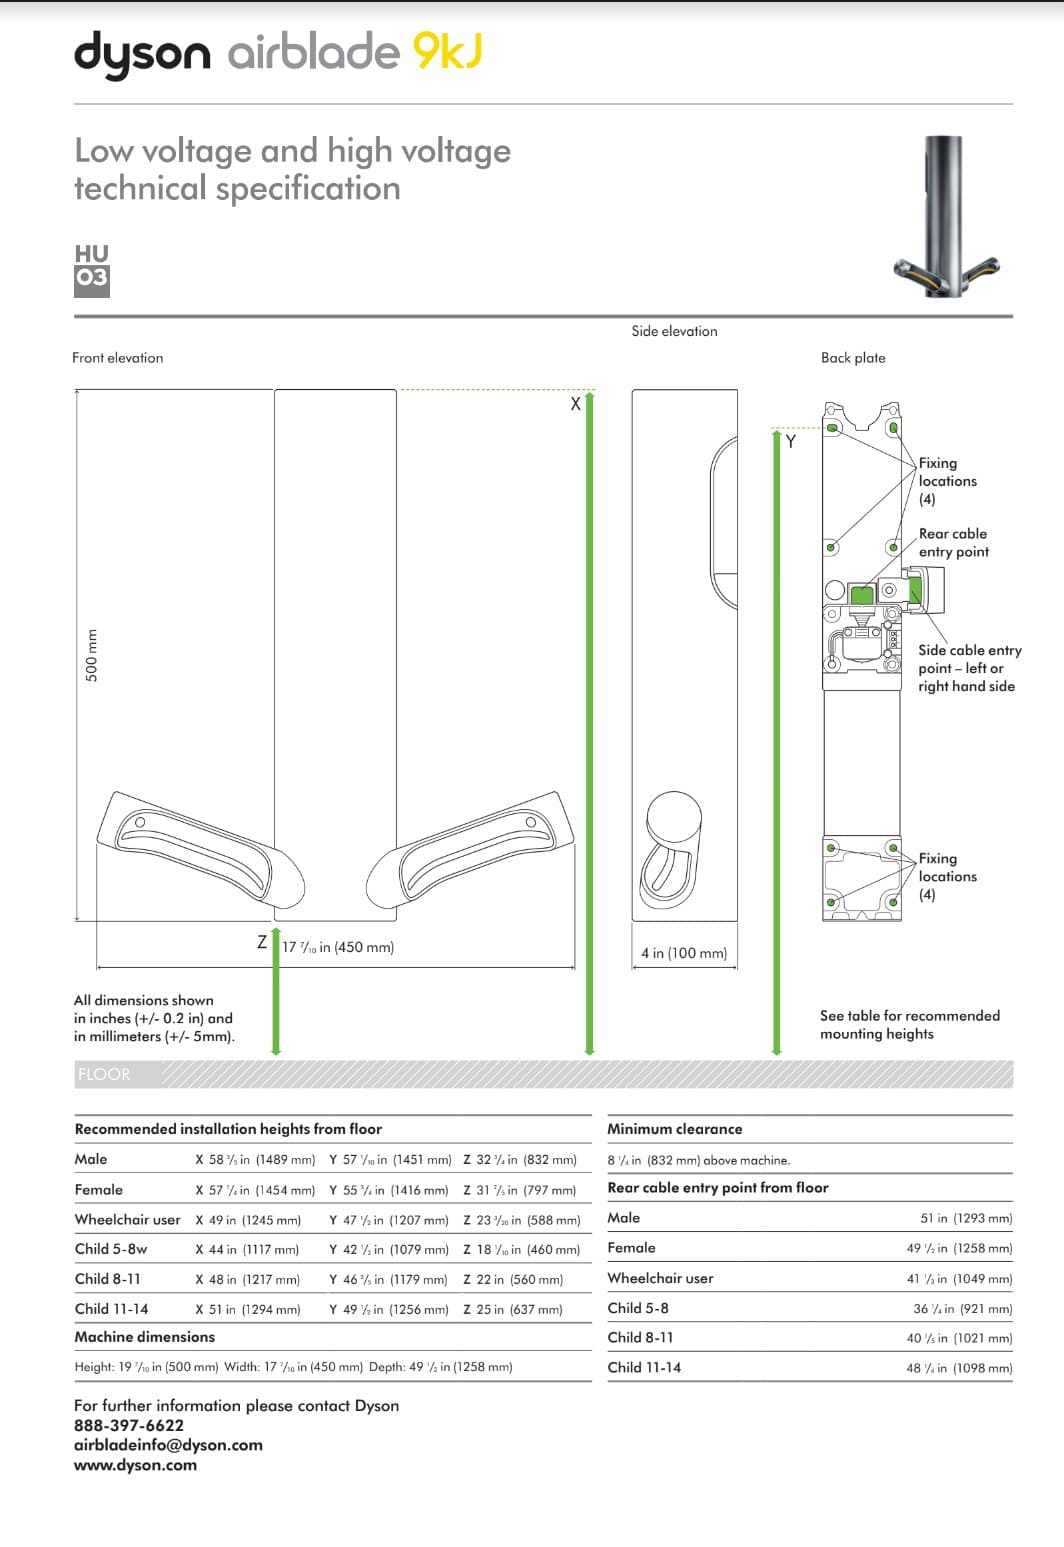 Thumbnail of the Dyson Airblade 9KJ Hand Dryer Specification Sheet PDF